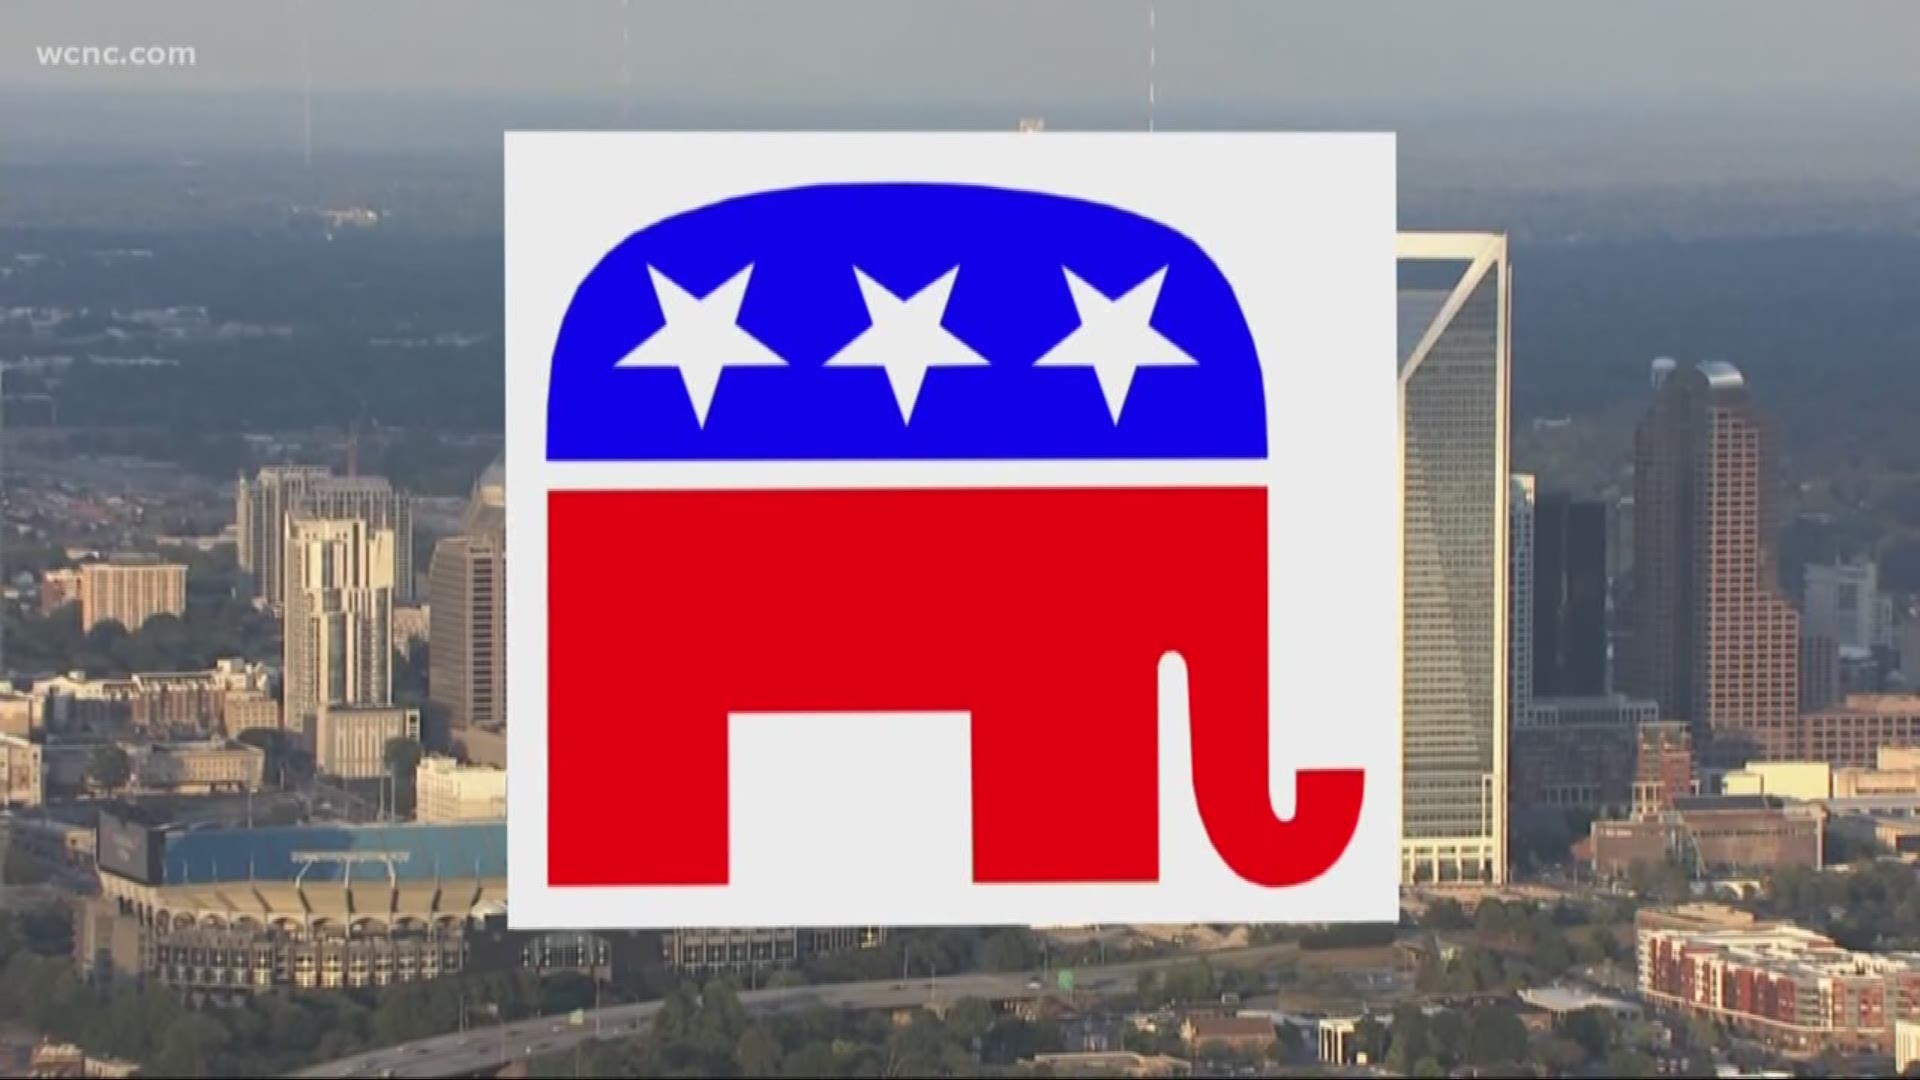 Report: Charlotte will host RNC in 2020